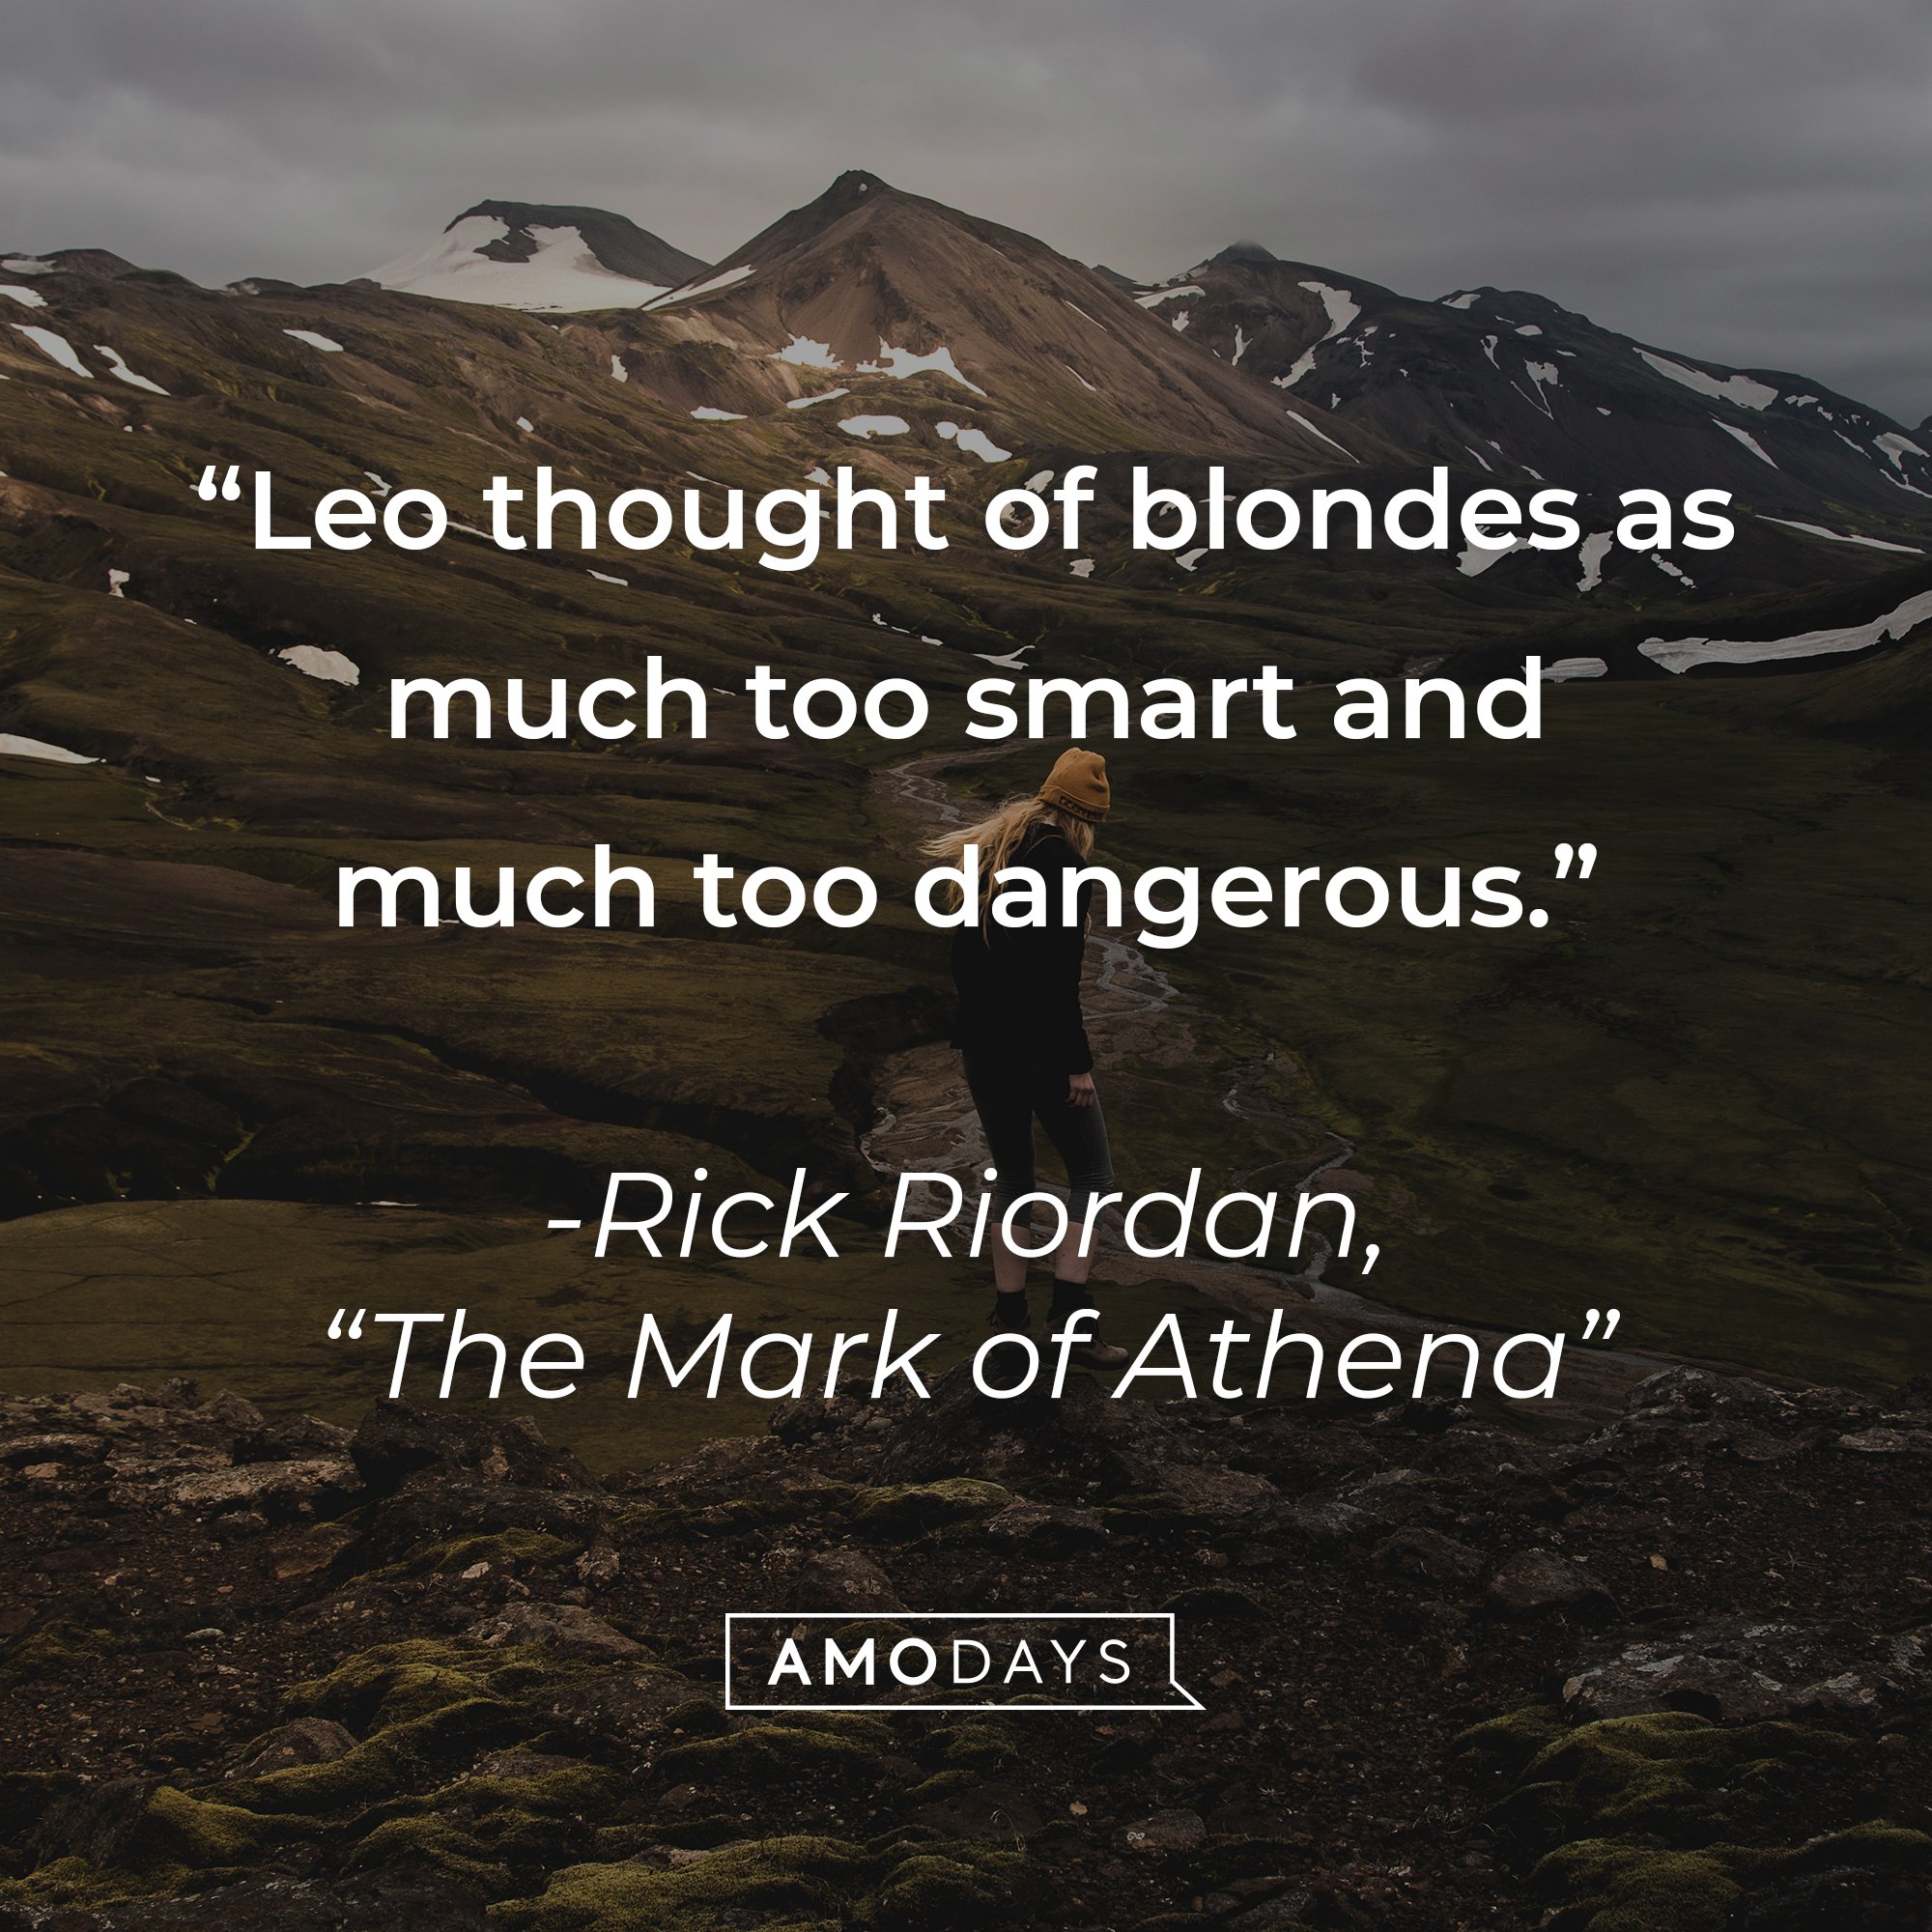 Rick Riorda’s quote from "The Mark of Athena": "Leo thought of blondes as much too smart and much too dangerous."   | Image: AmoDays